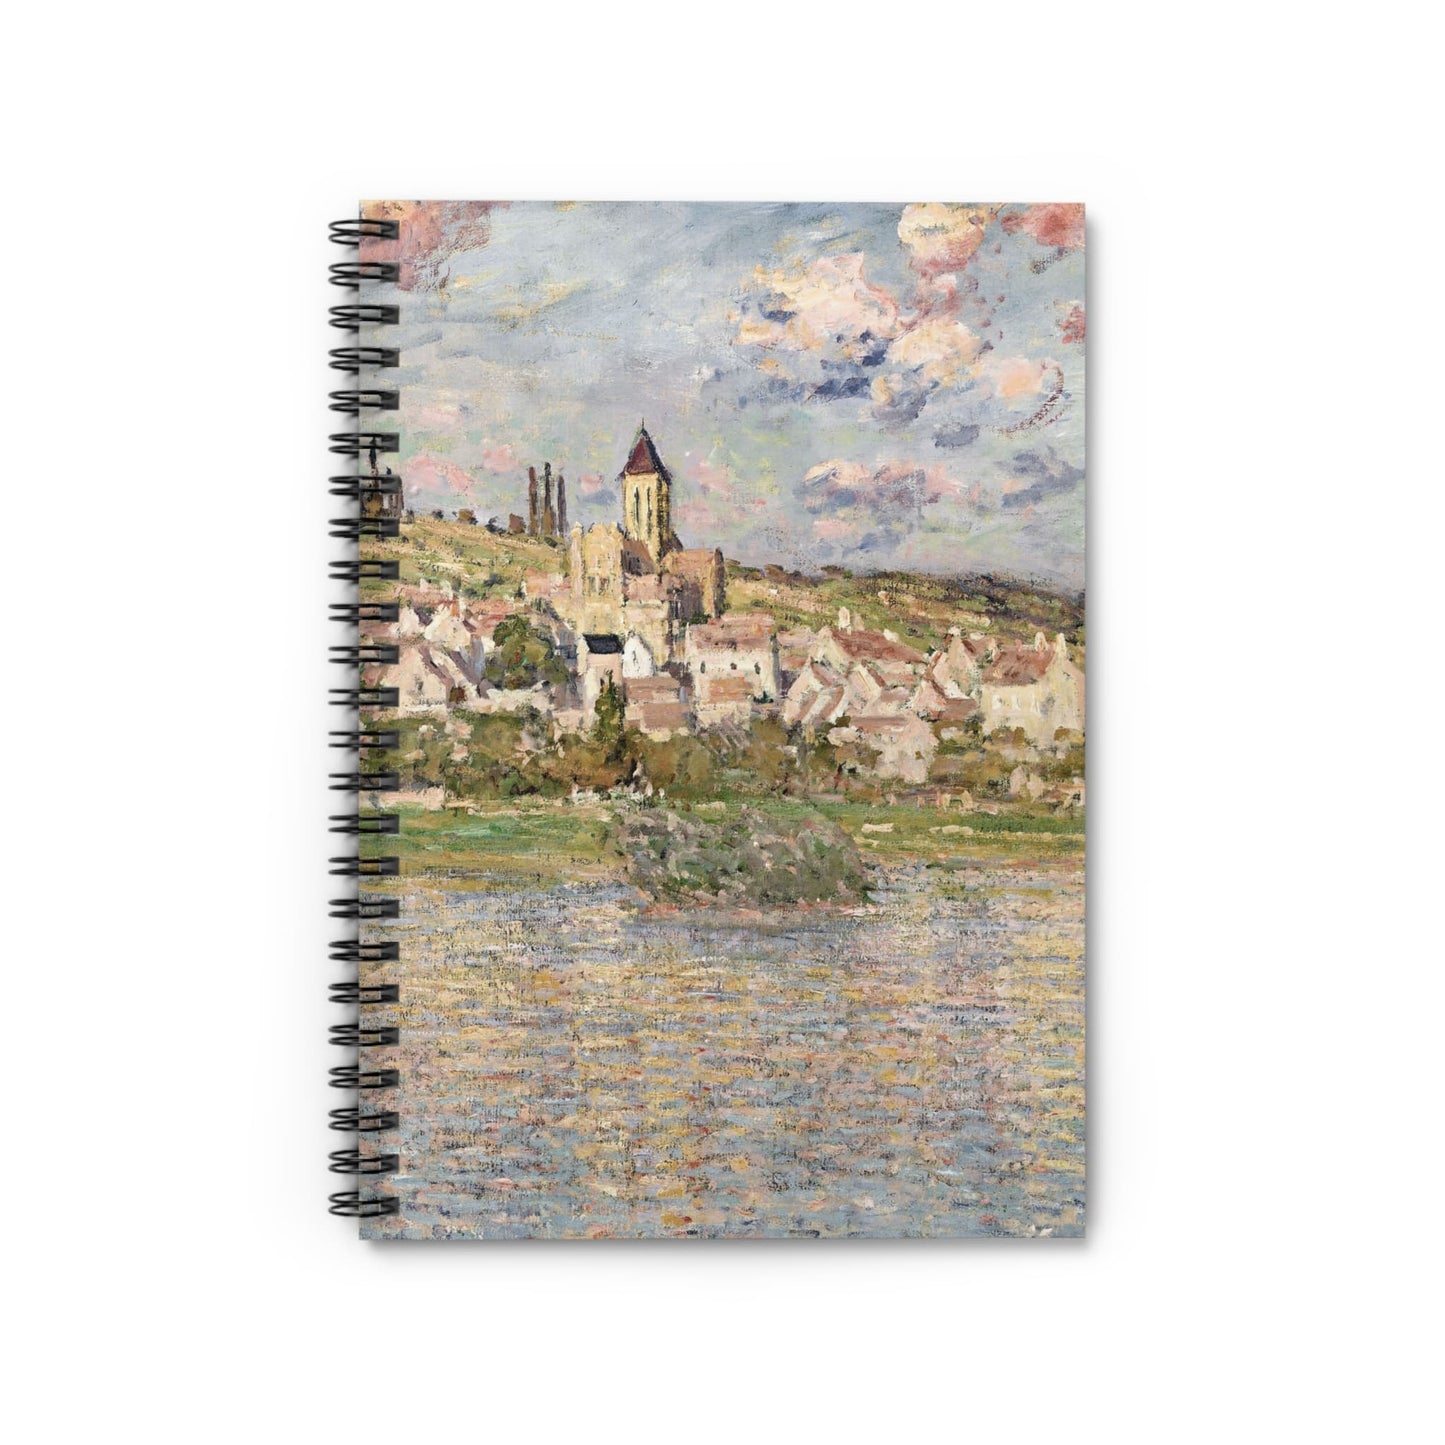 Paris Landscape Notebook with Seine River cover, ideal for travelers, showcasing scenic views of the Seine River.